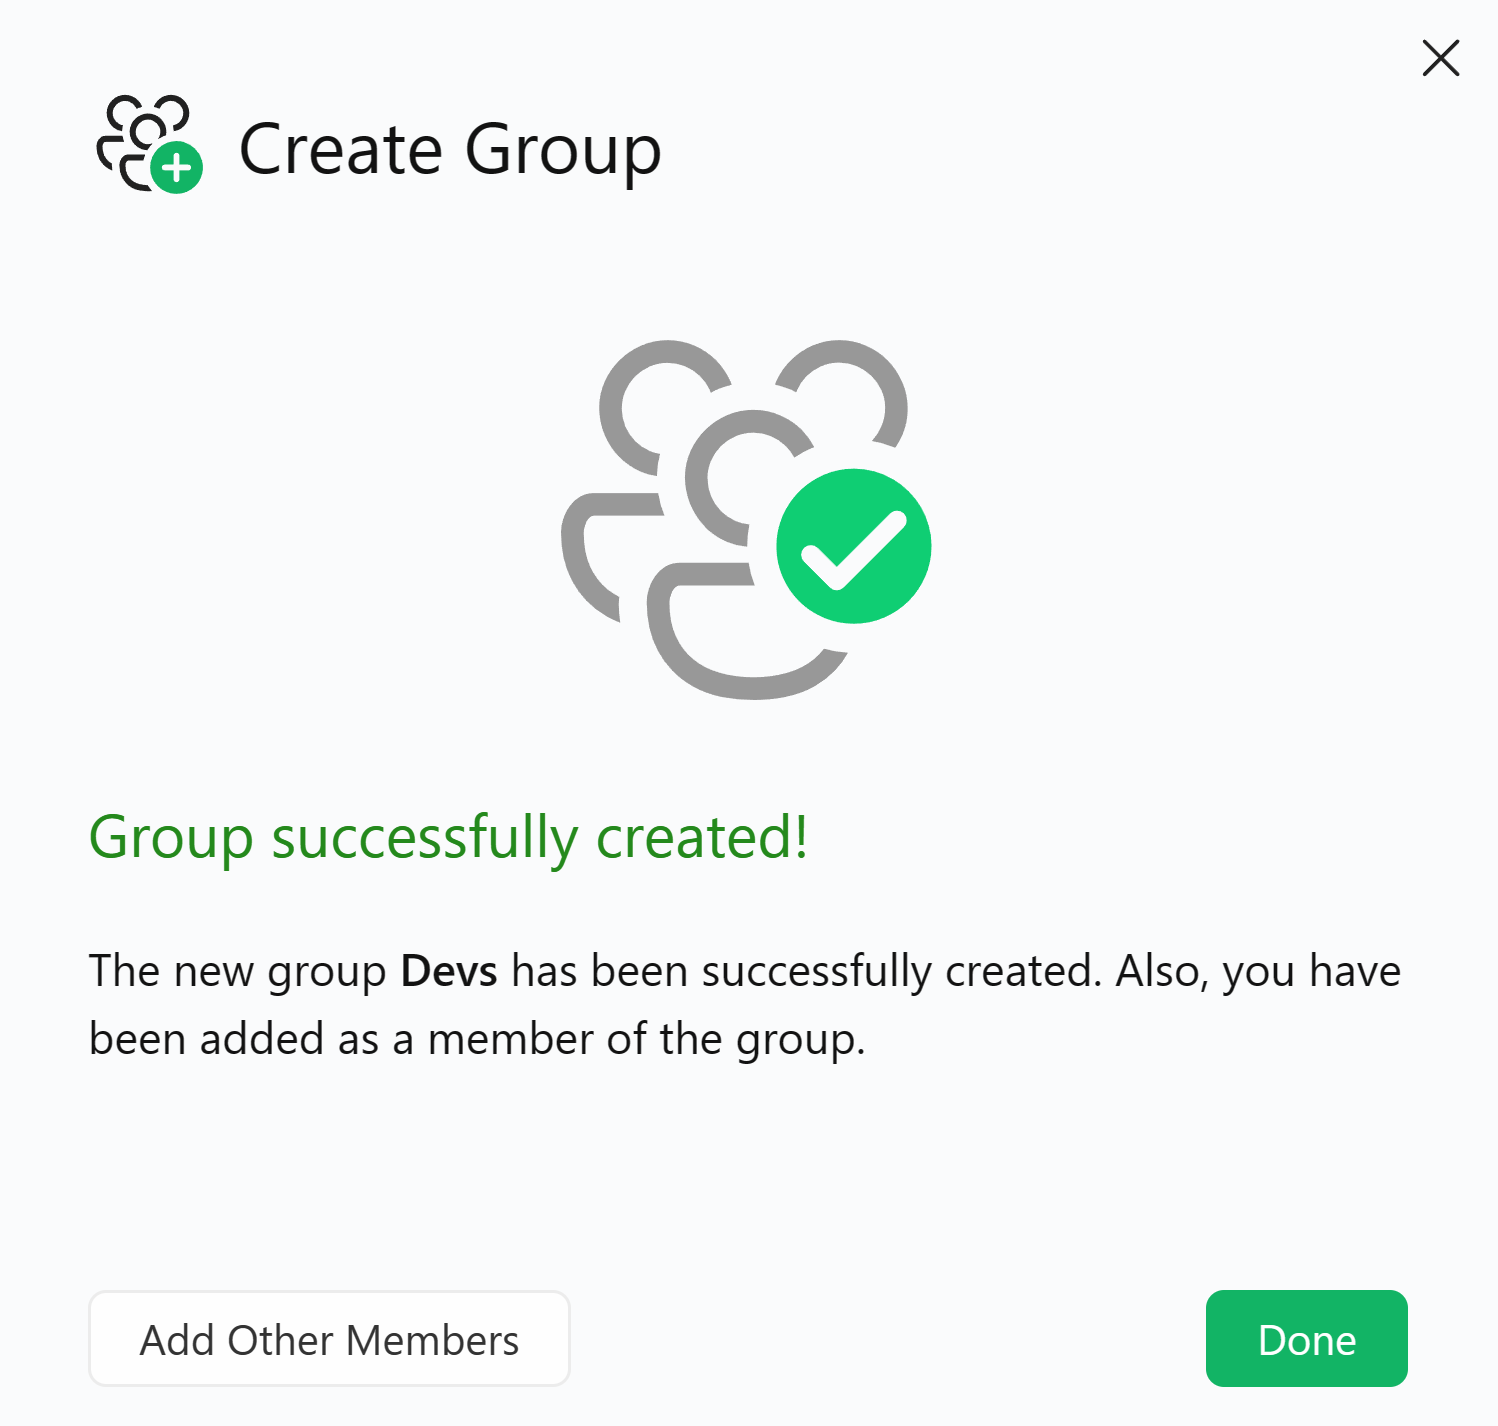 Group successfully created in DAX Optimizer